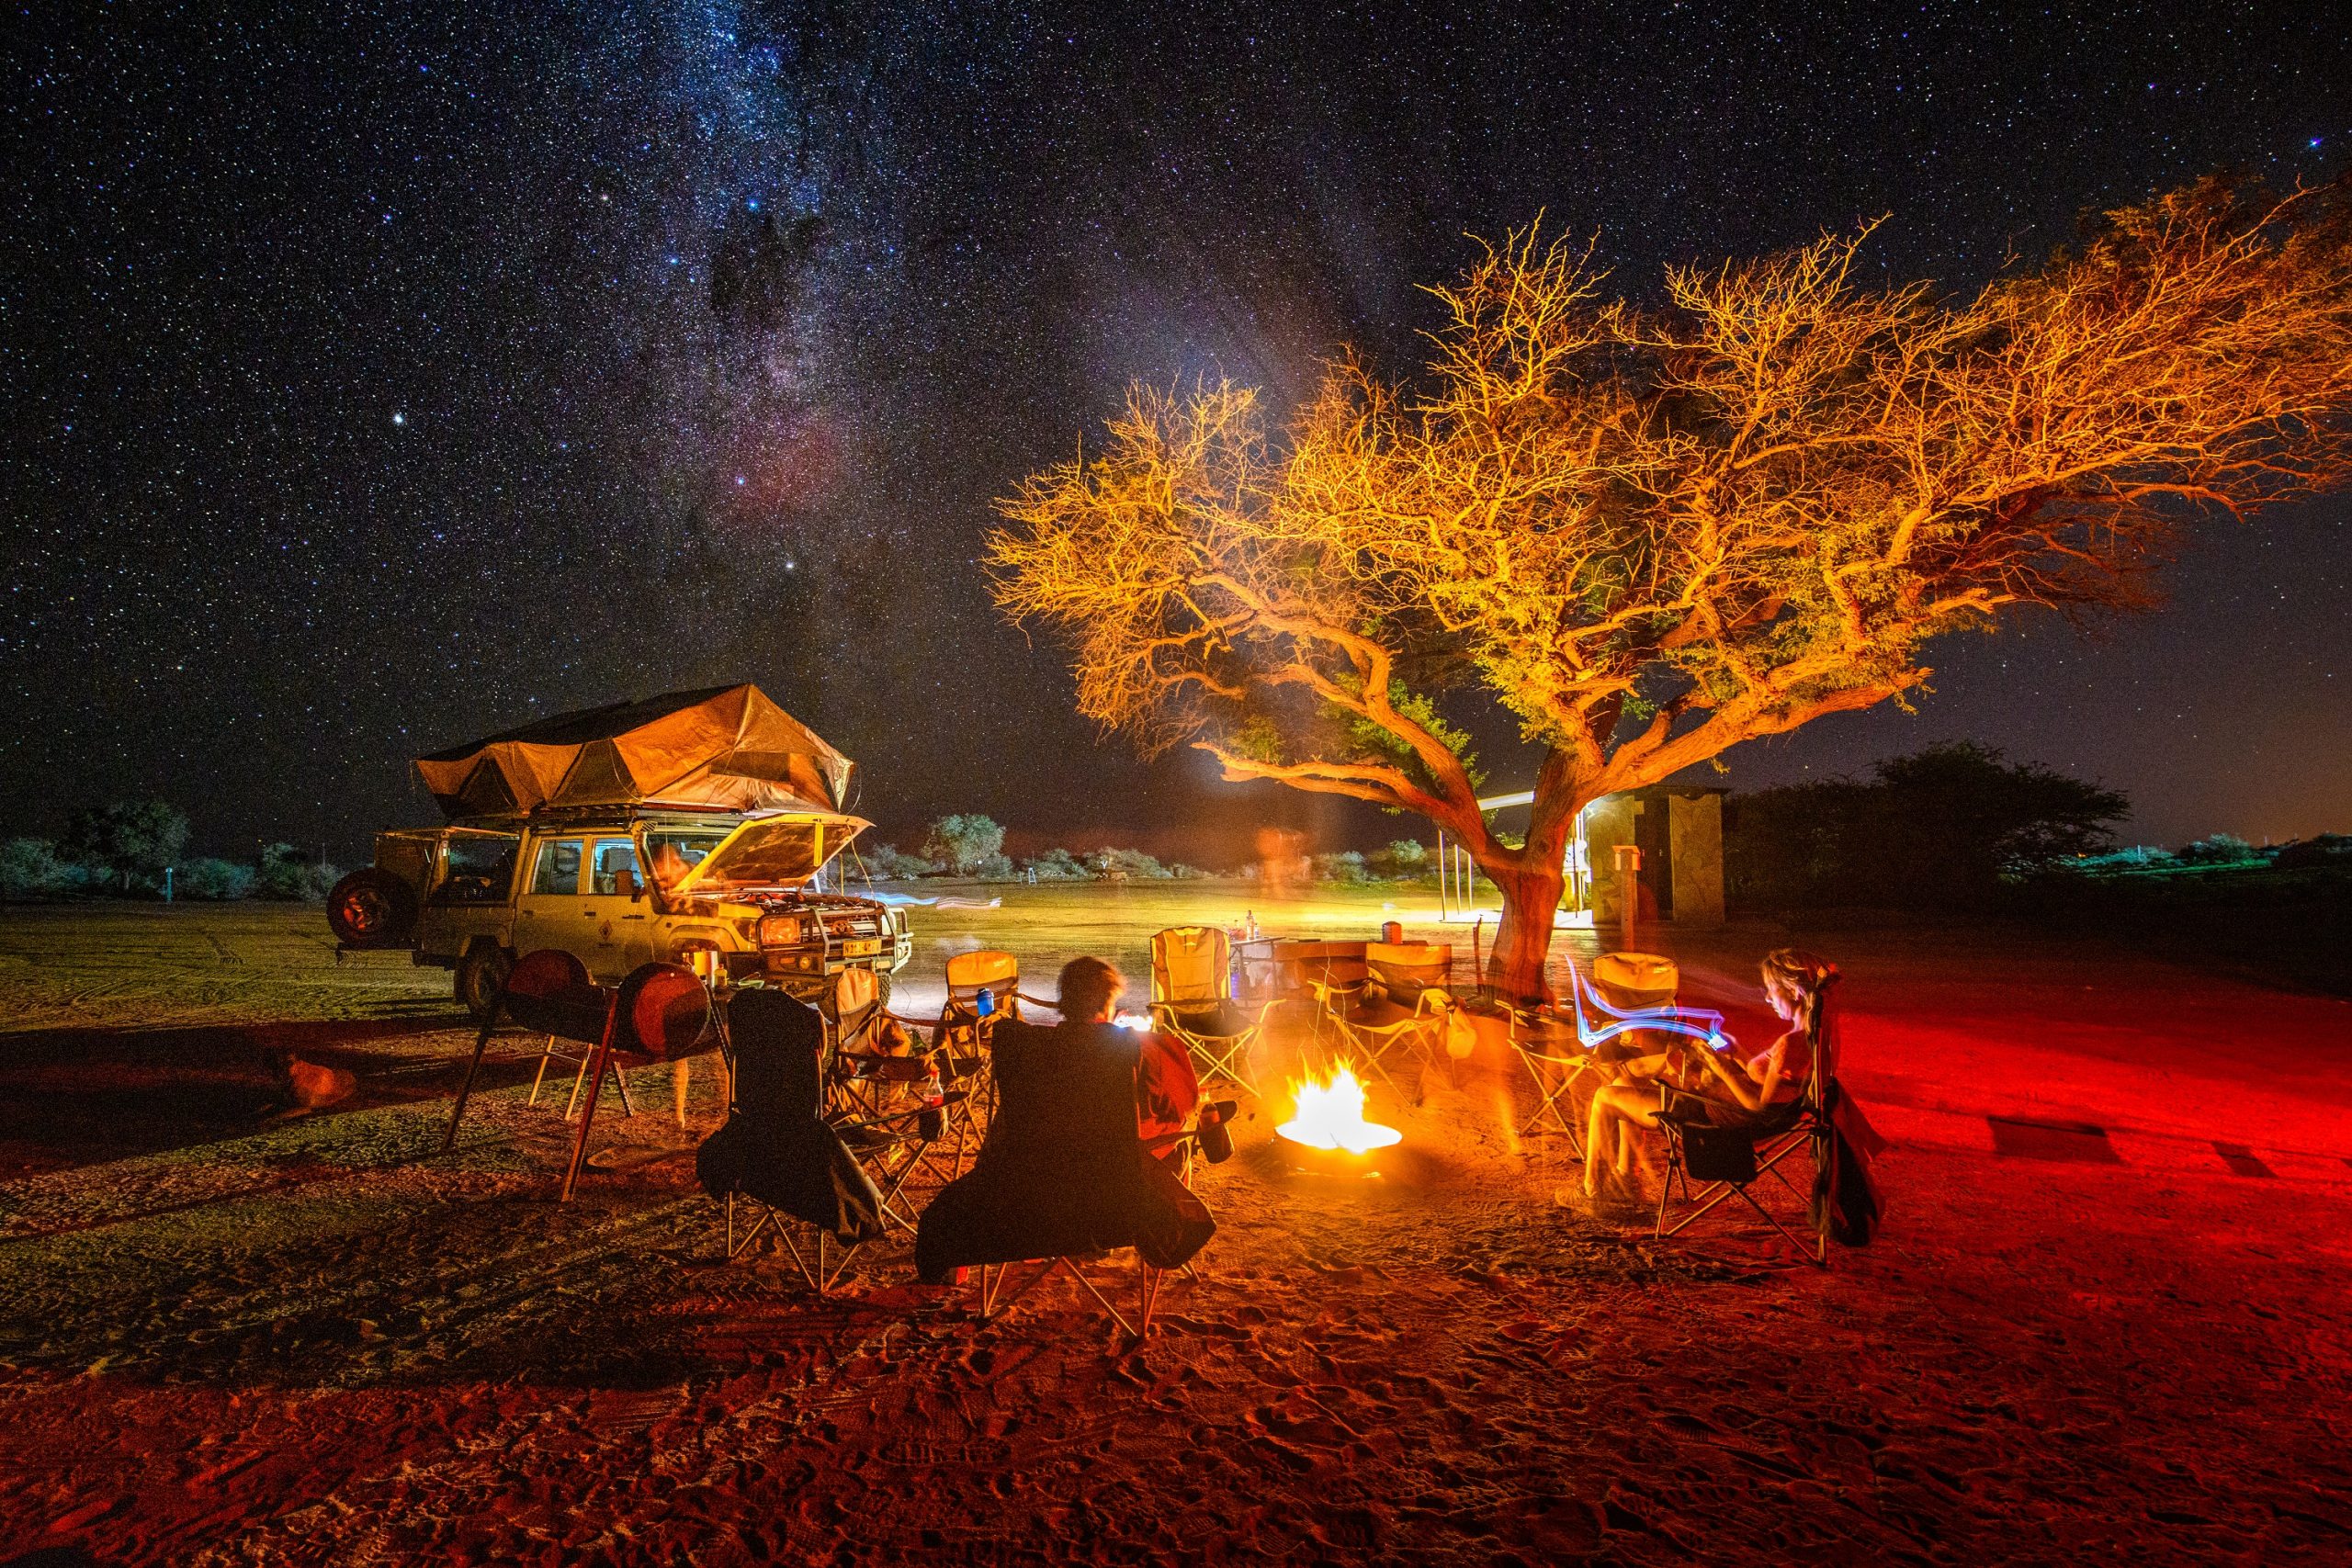 A group sits around a campfire under the milkway